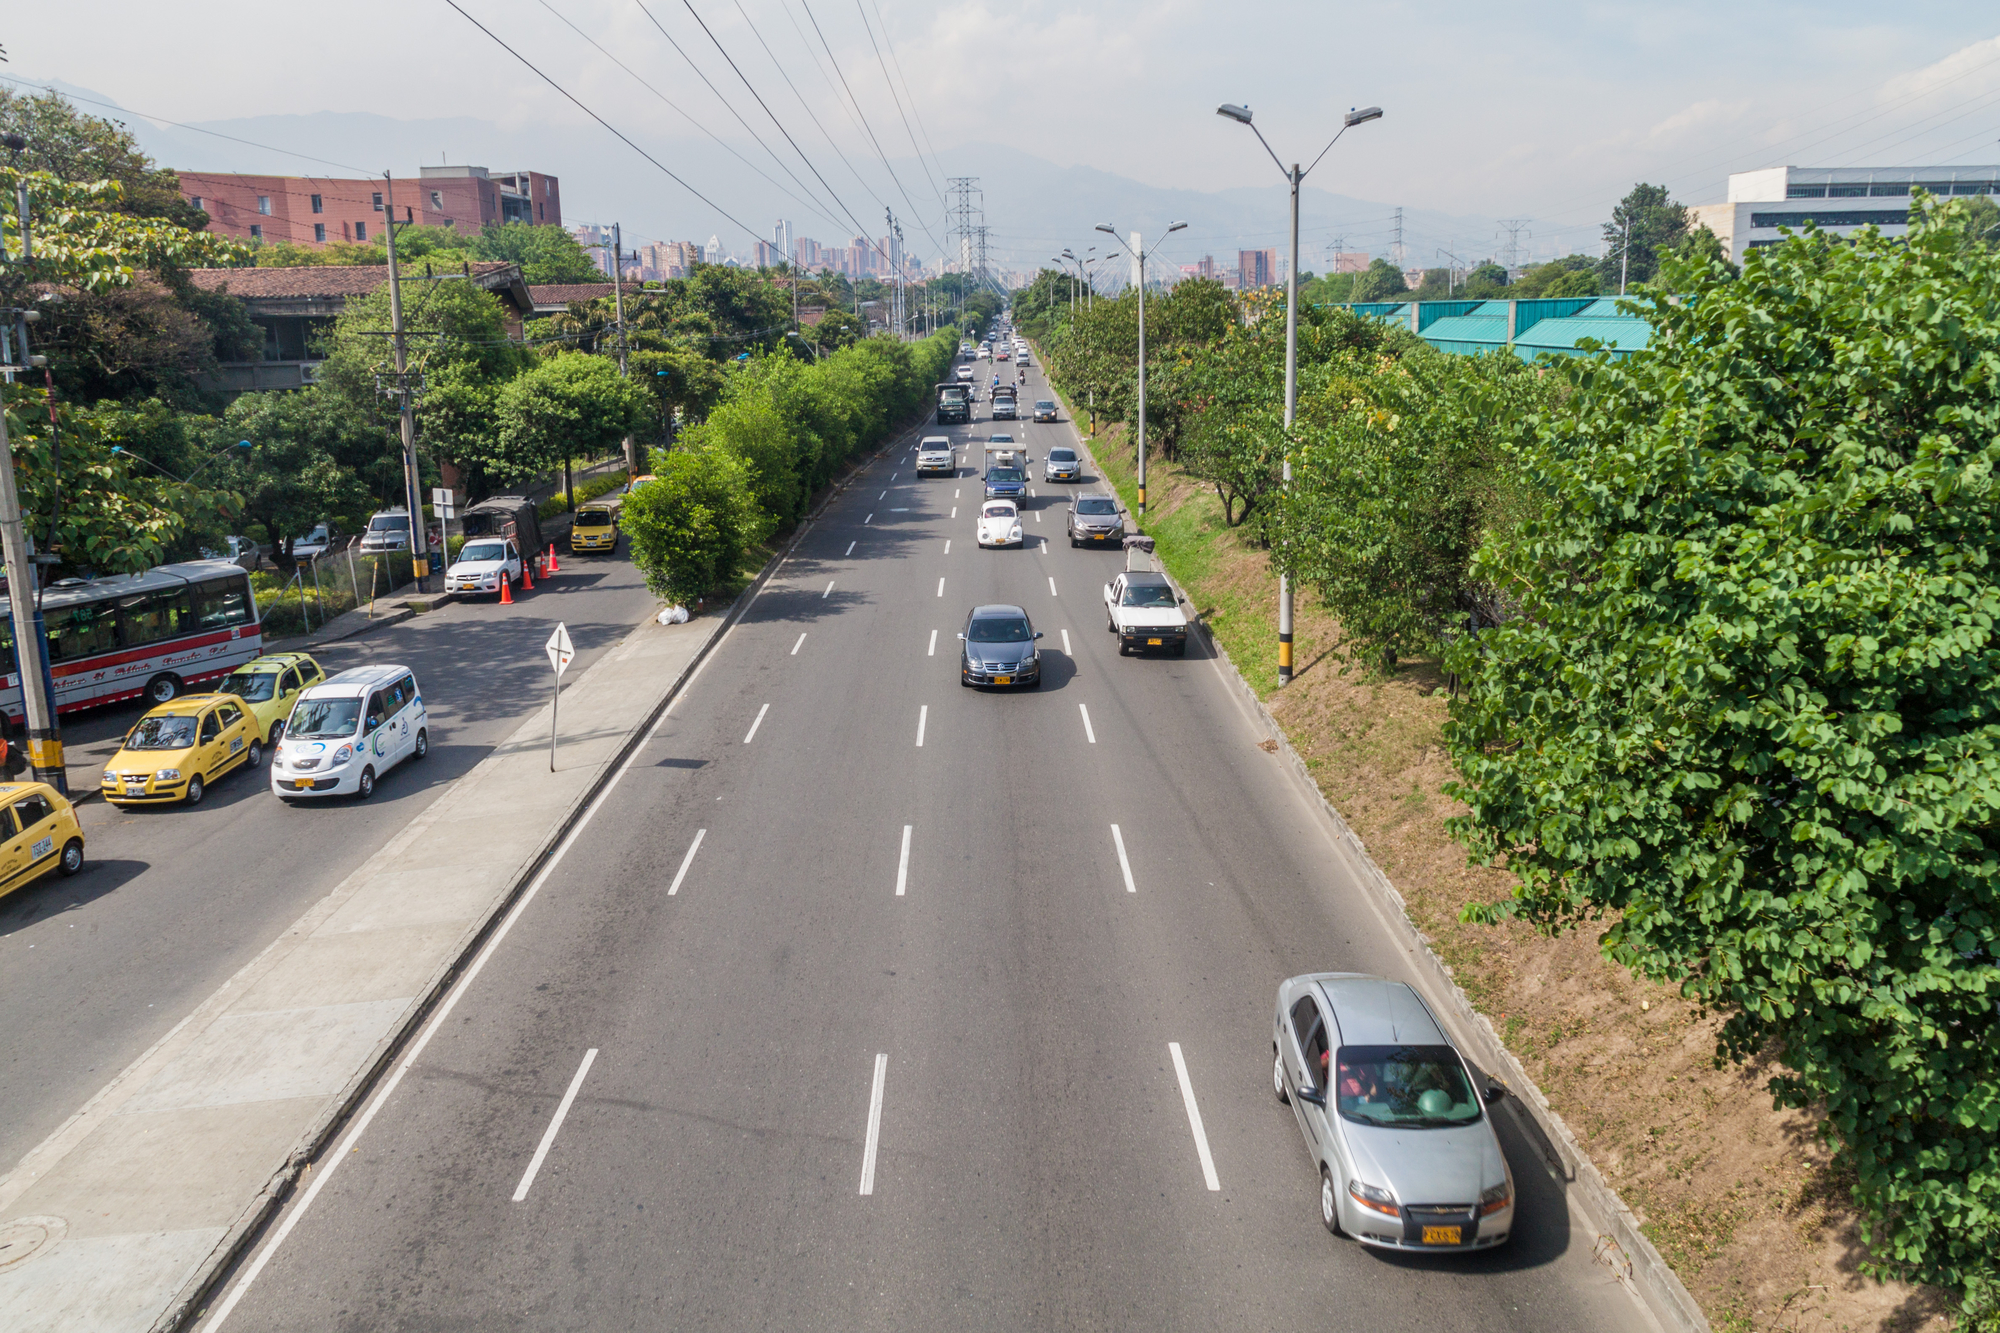 Does restricting the use of private vehicles tackle Medellín’s pollution problem?